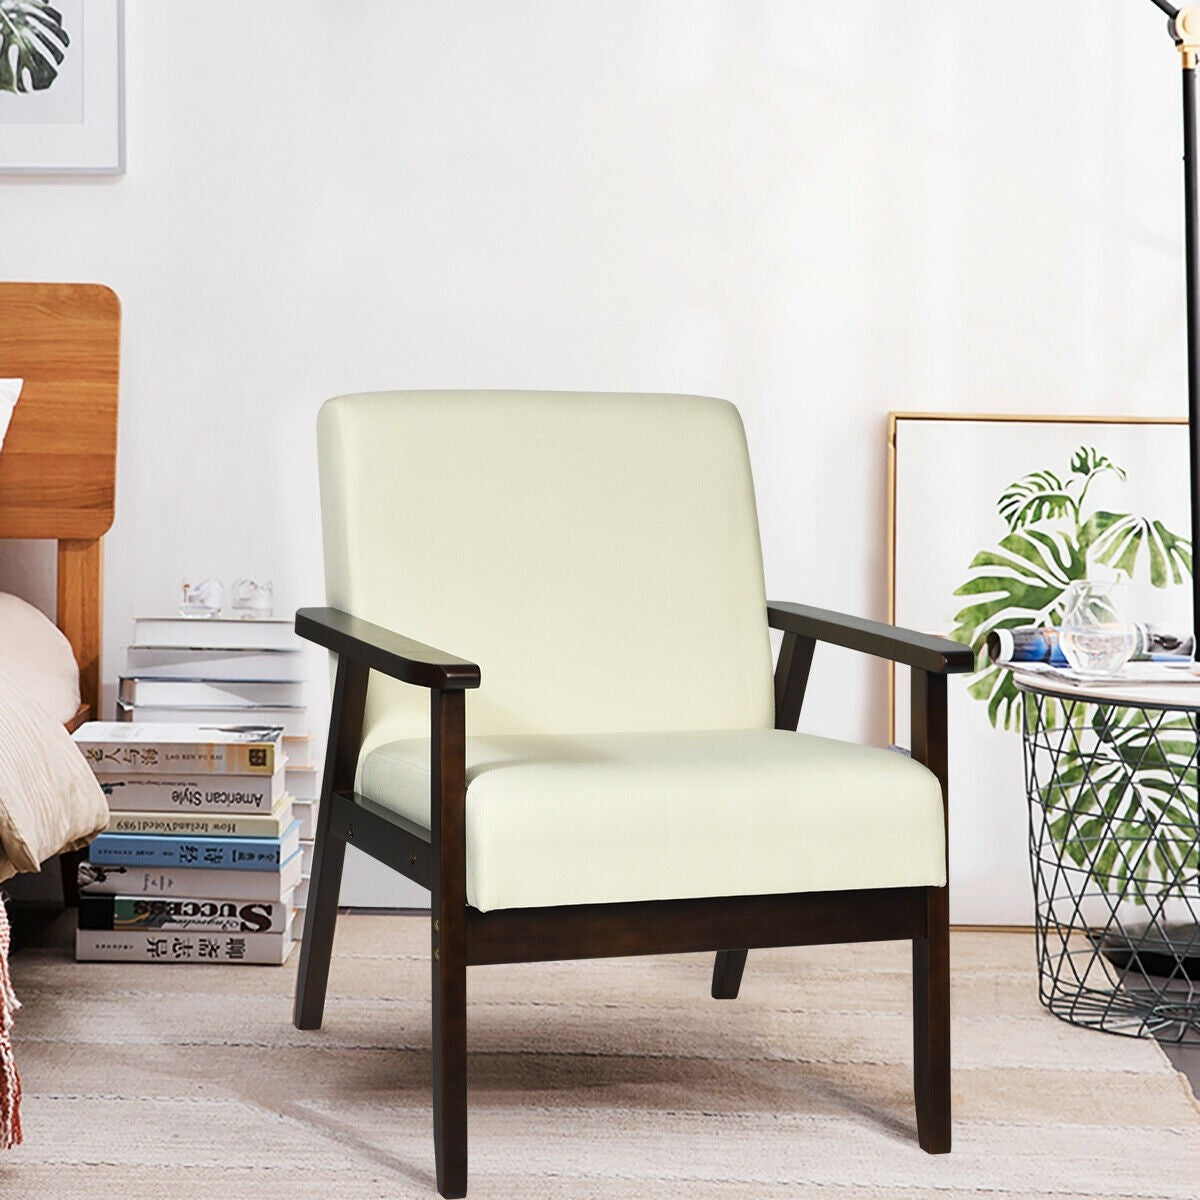 Mid-Century Modern Accent Chair for Living Room - Giantexus